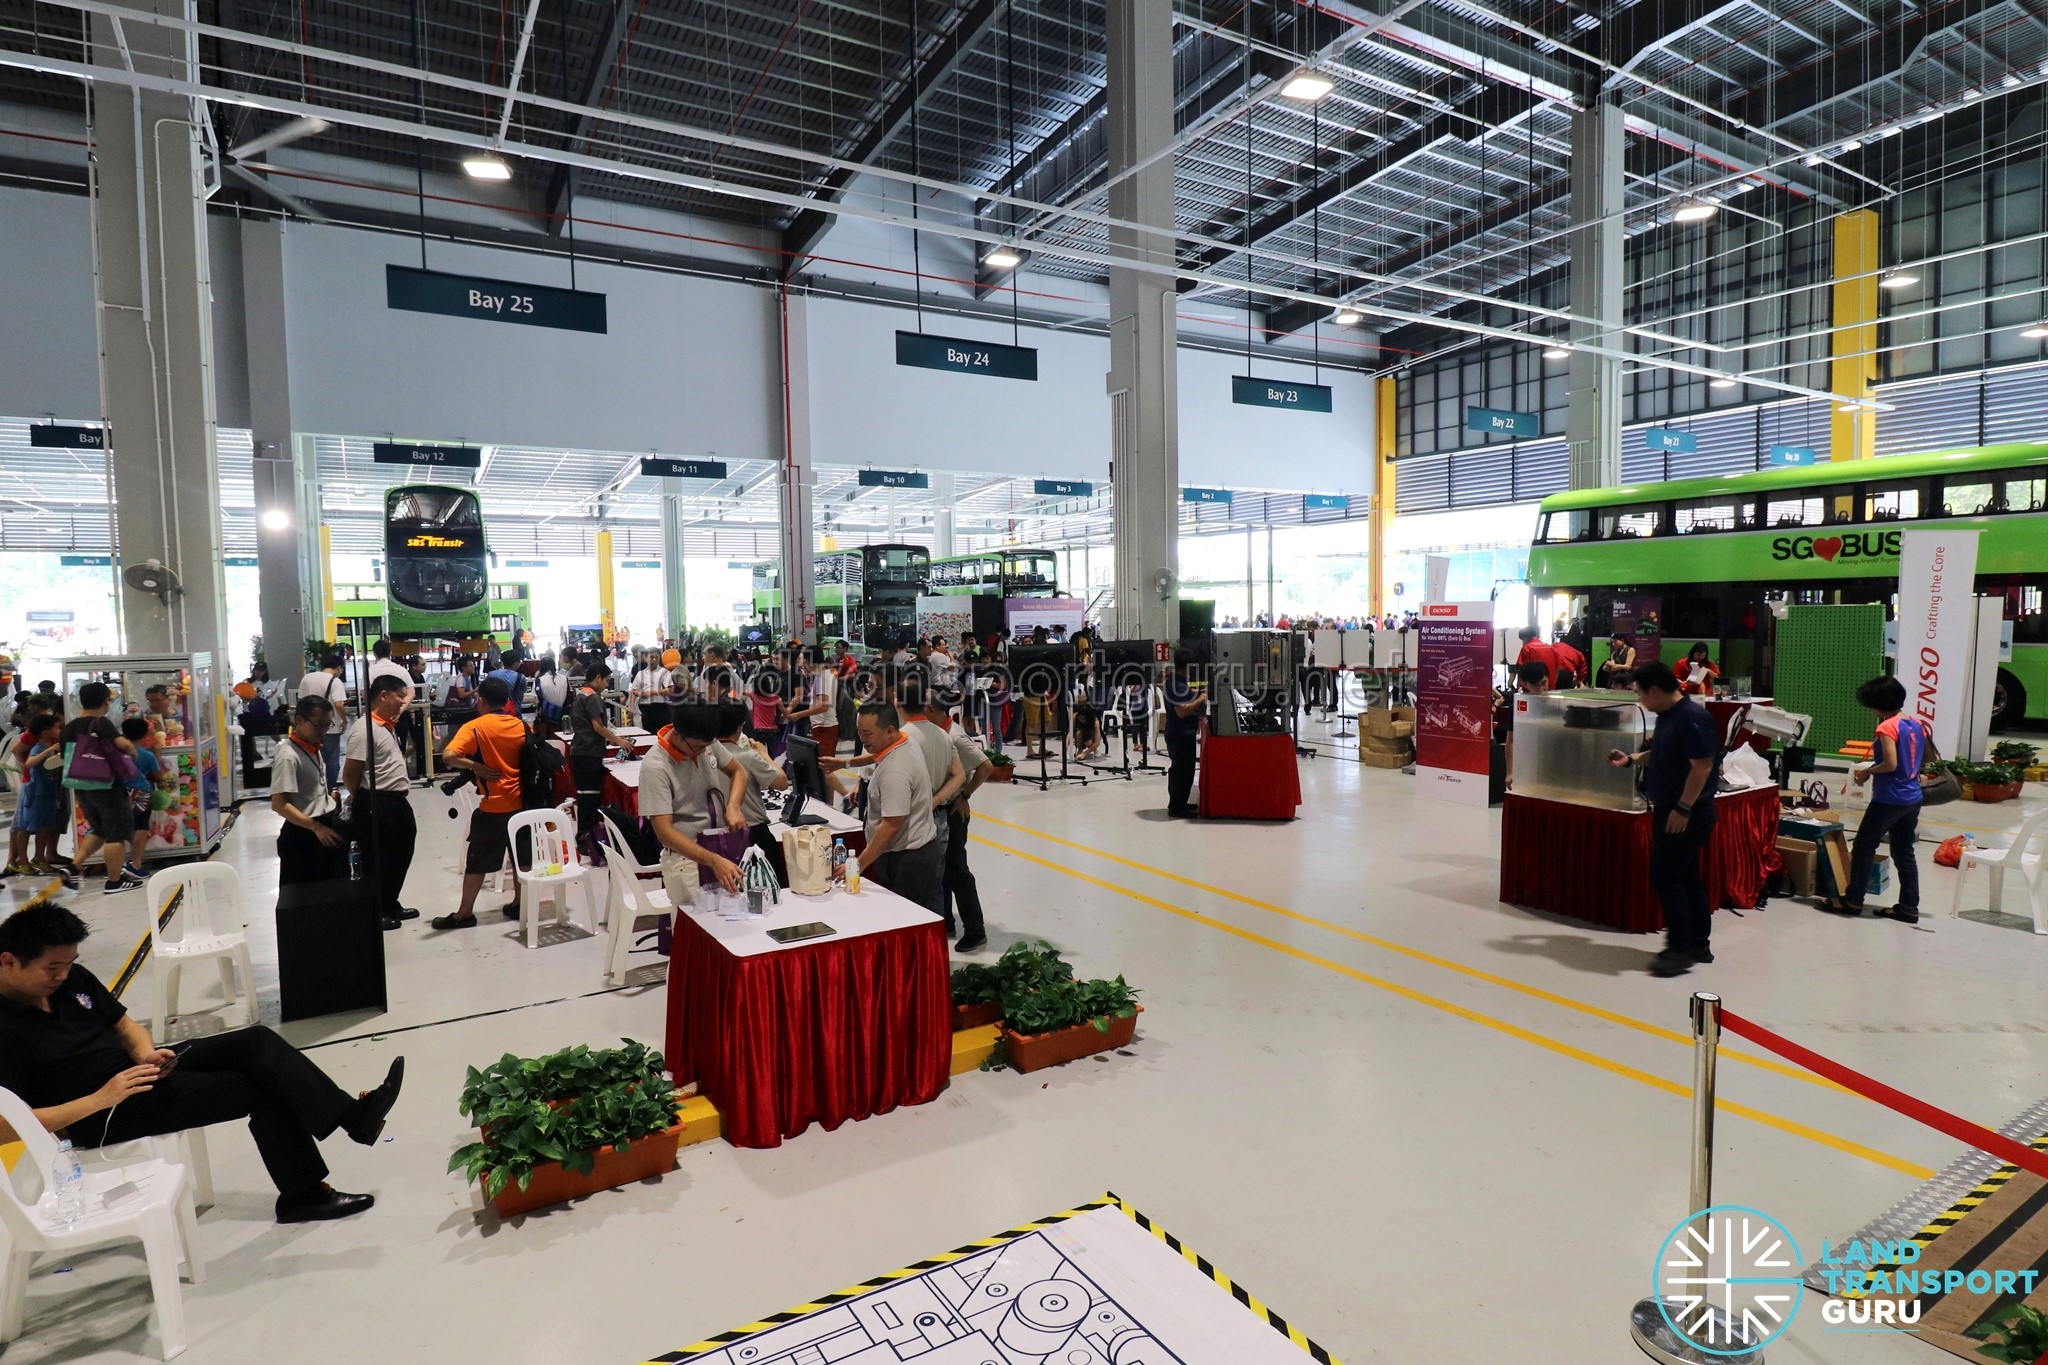 Exhibition Booths at the Seletar Bus Depot Carnival